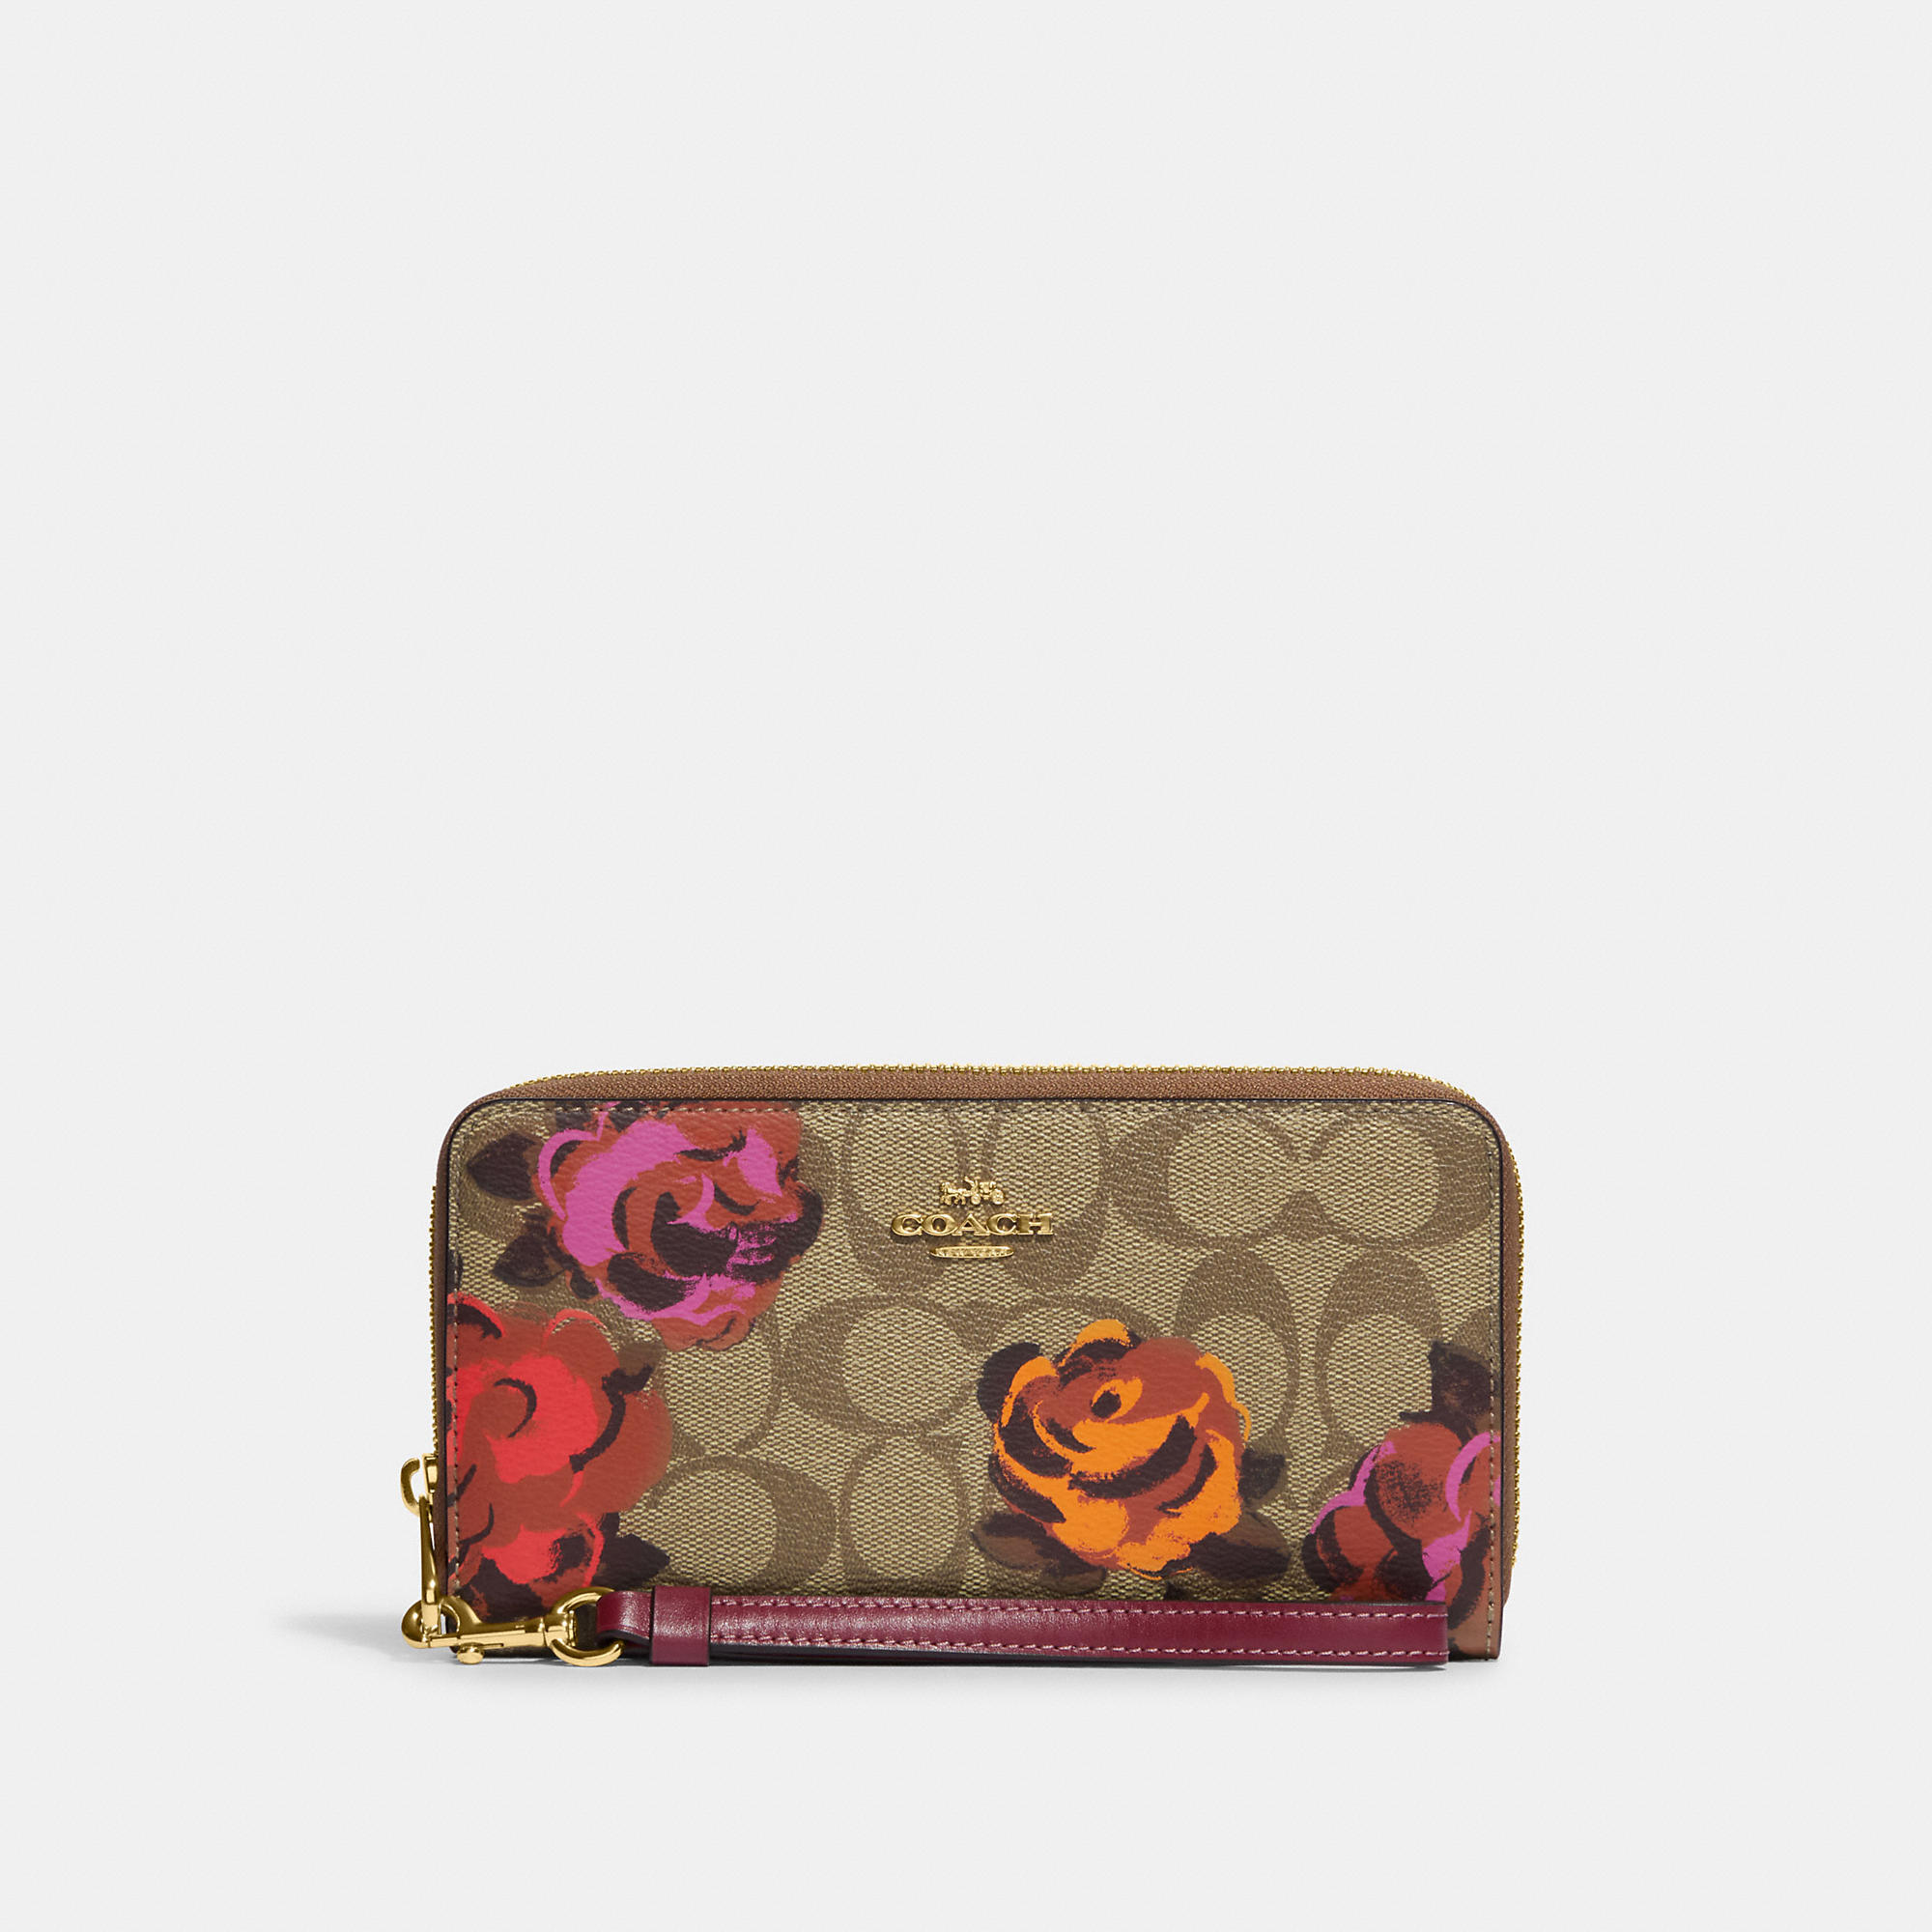 Coach Outlet Long Zip Around Wallet In Signature Canvas With Jumbo Floral Print - Beige